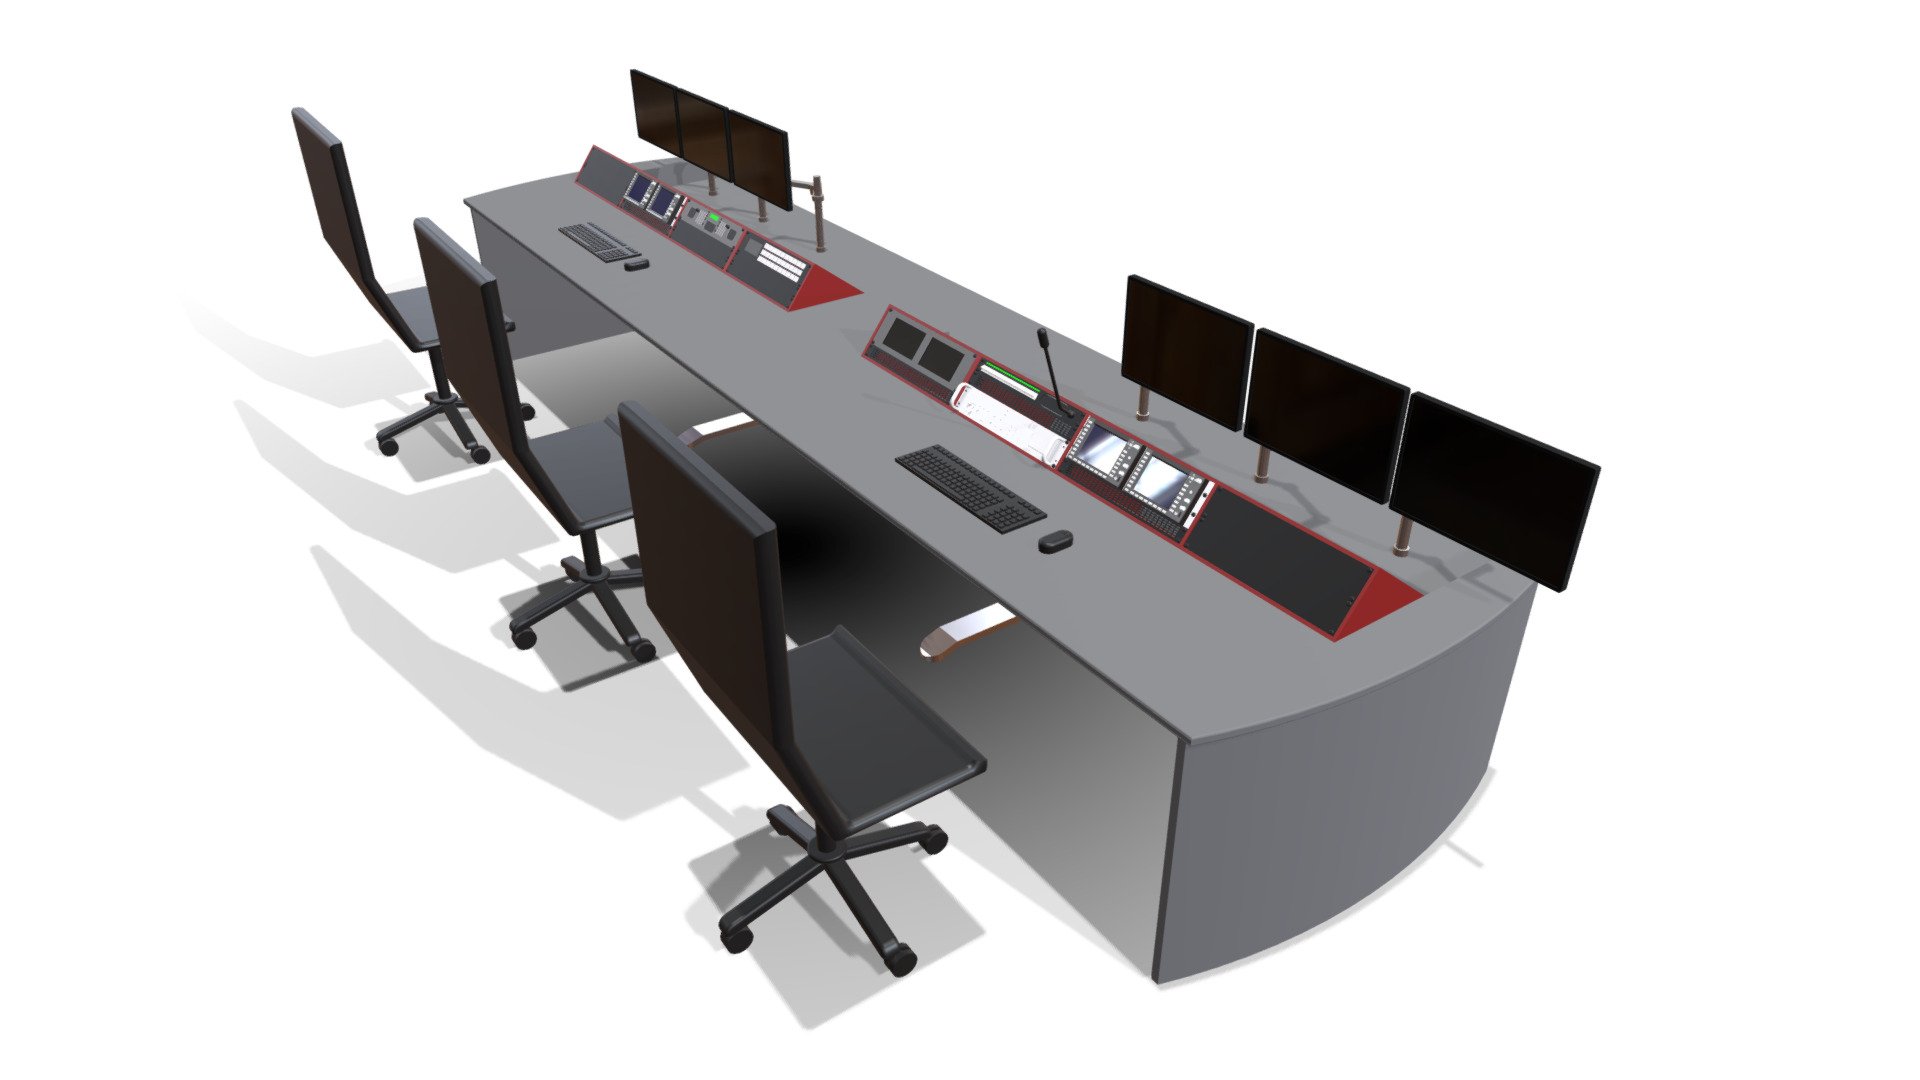 8 Bay Studio Desk used for monitoring, recording, command and operations environtments, incudes teset and measurement, switching, and communication equipment 3d model